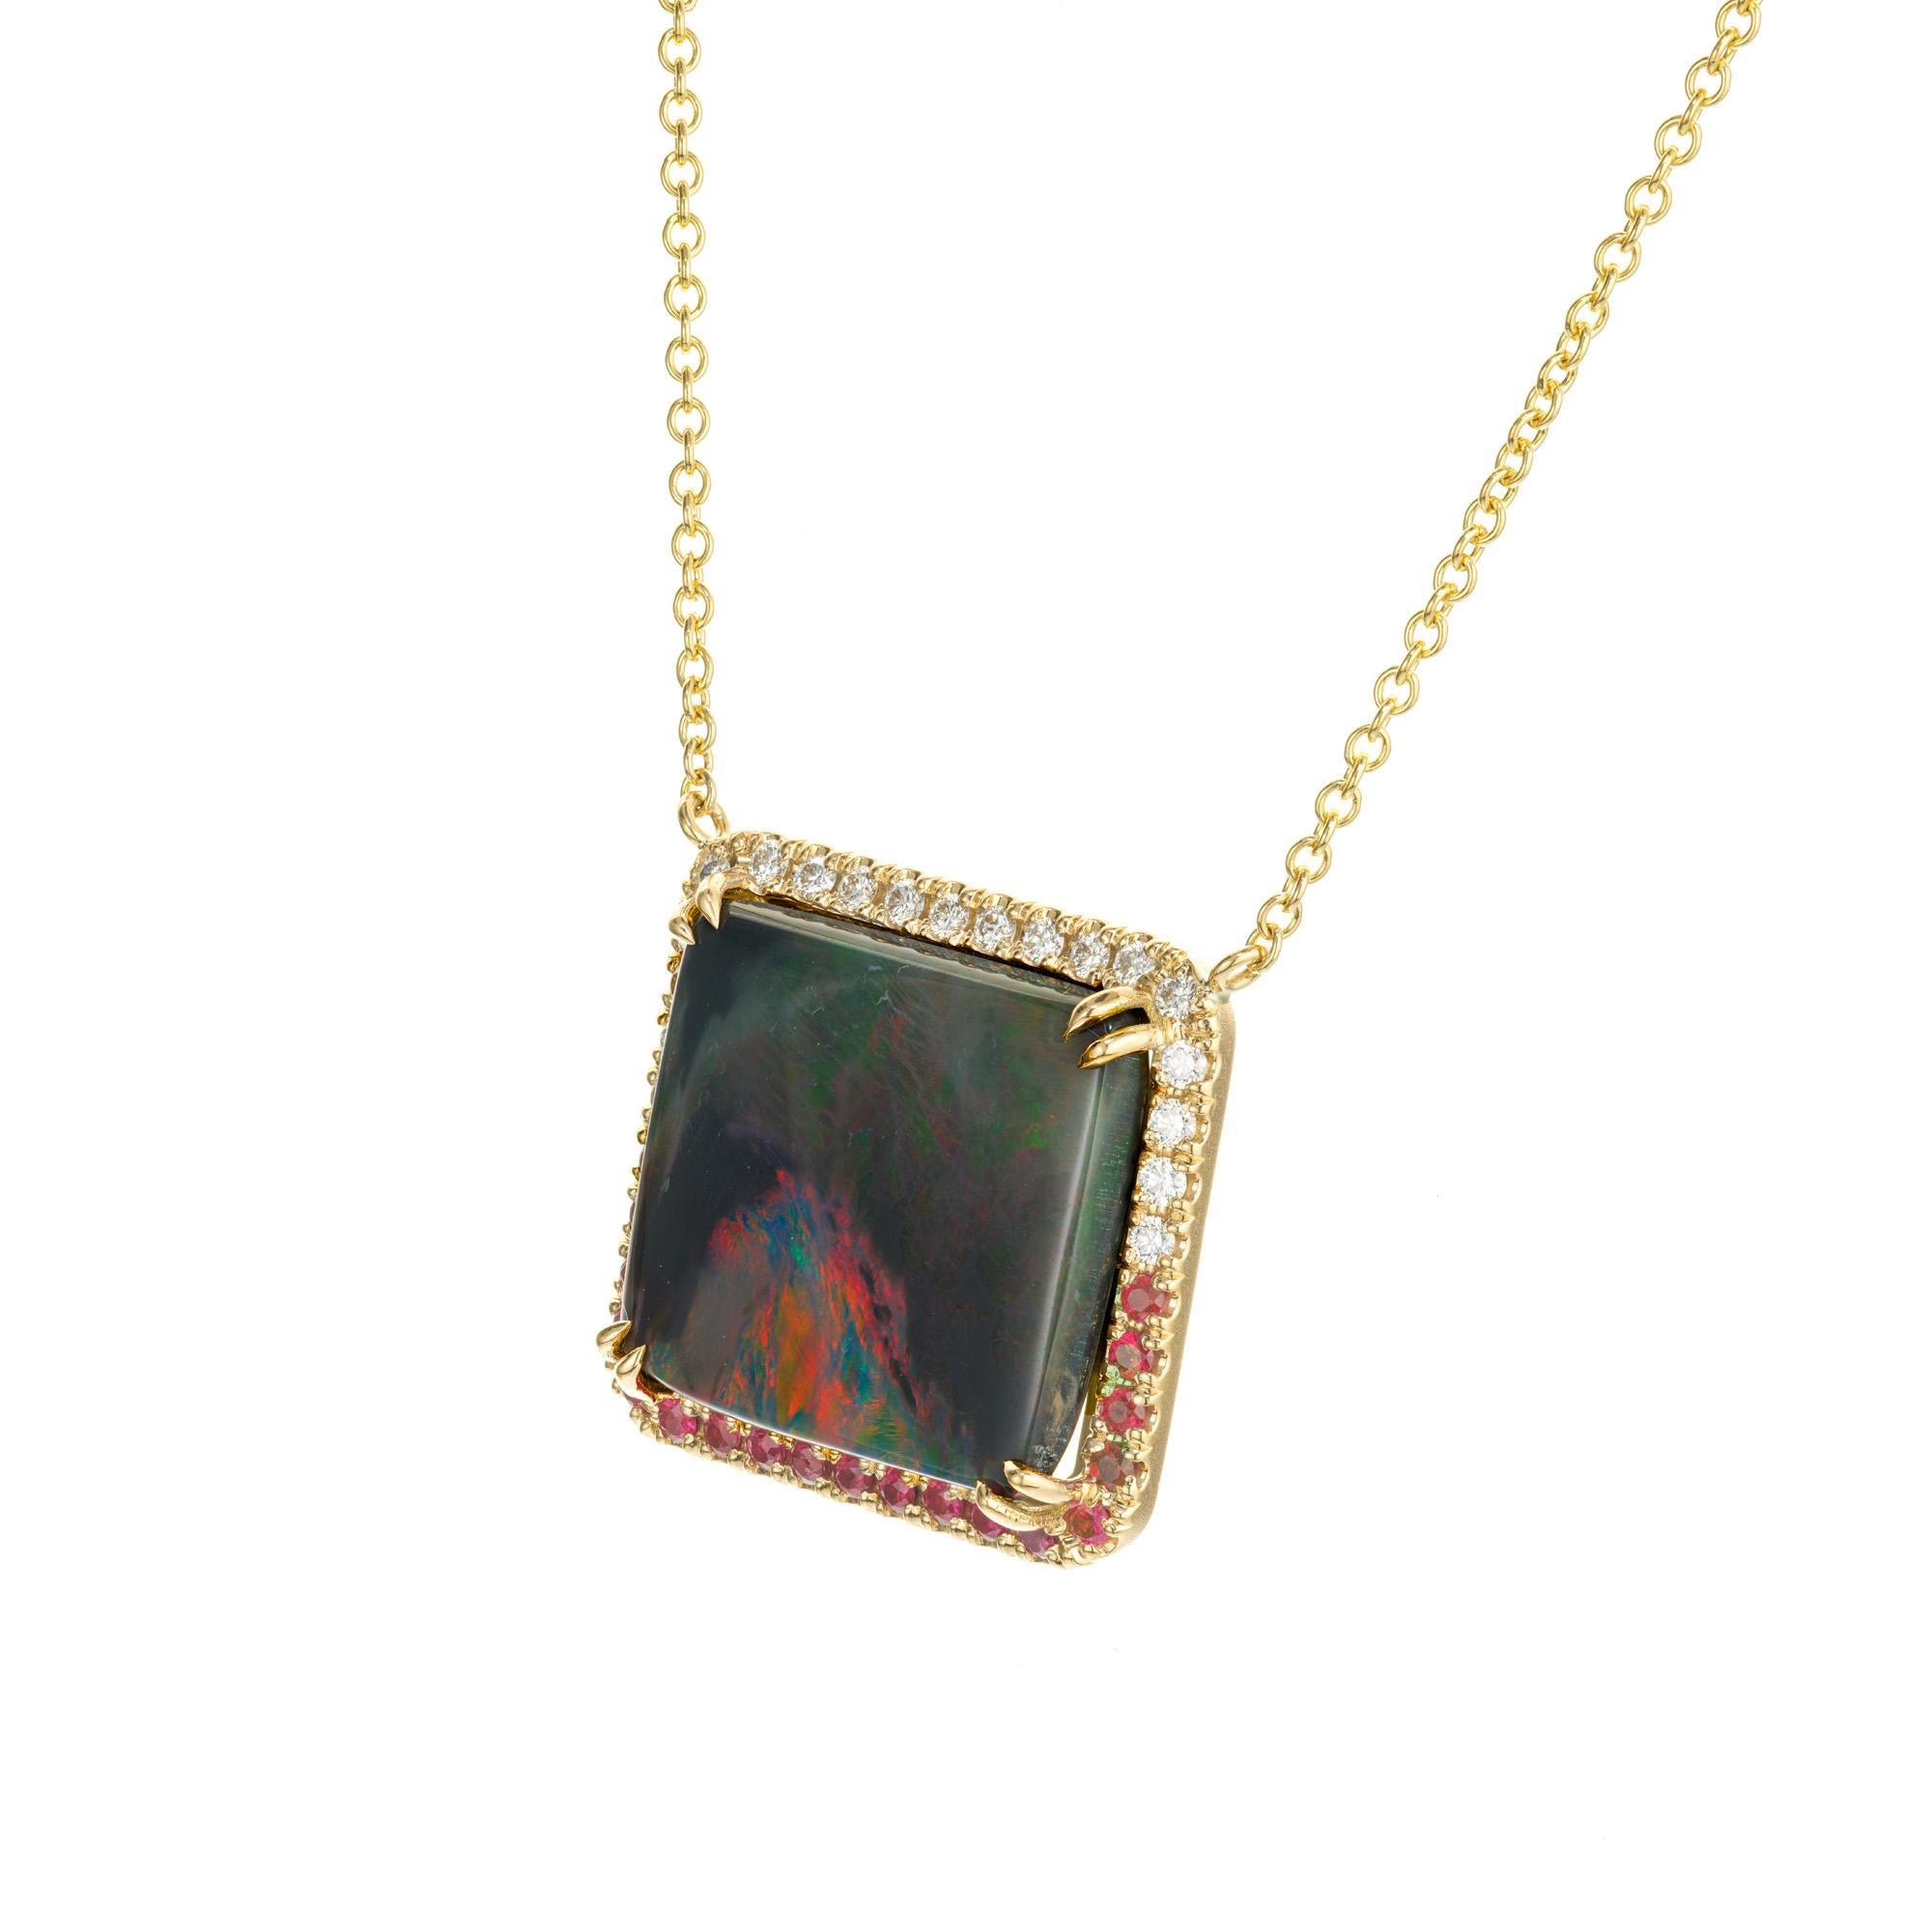 Opal, diamond and ruby pendant necklace. GIA certified 13.74cts square opal with a halo of 19 round diamonds and 19 round rubies set in 18k yellow gold. 18 inch chain. The background color of the opal is gray with red and green flashes. Designed and